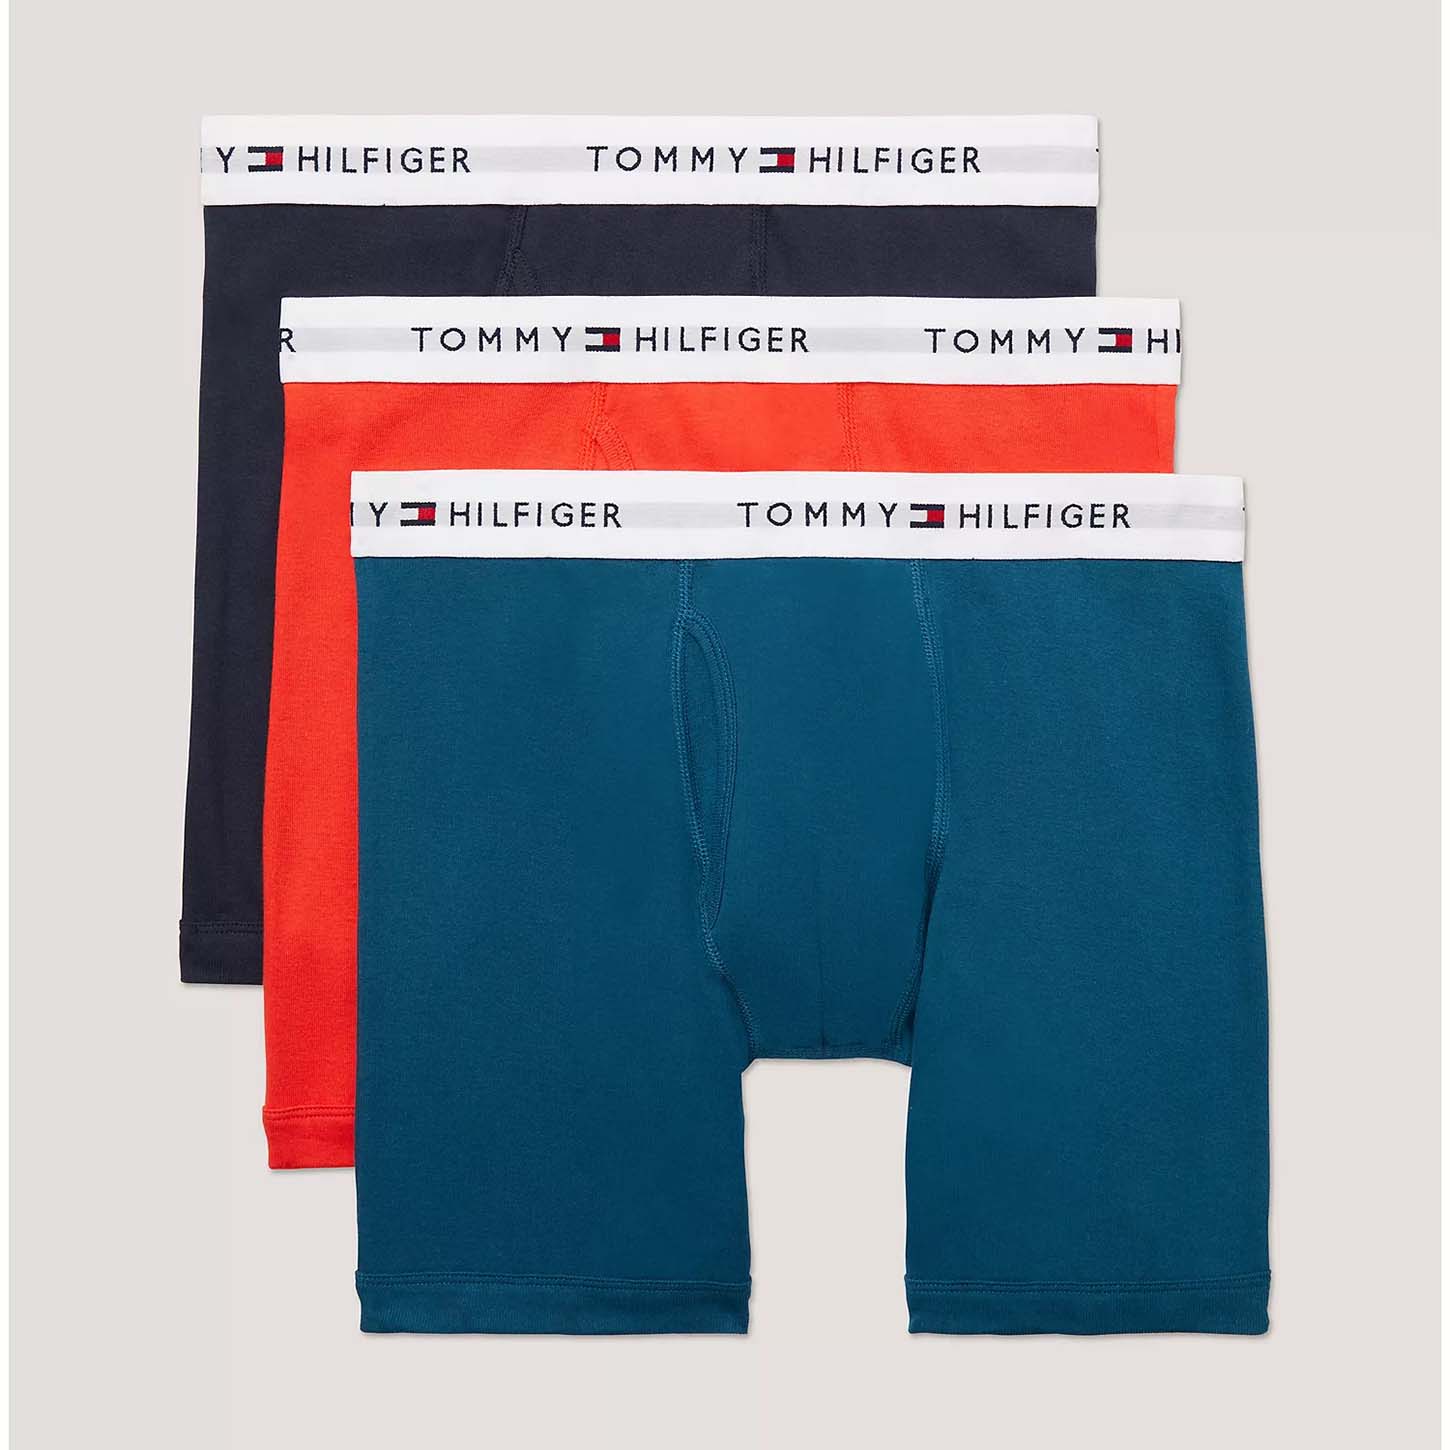 tommy hilfiger 3 pack of briefs in deep blue, black and red